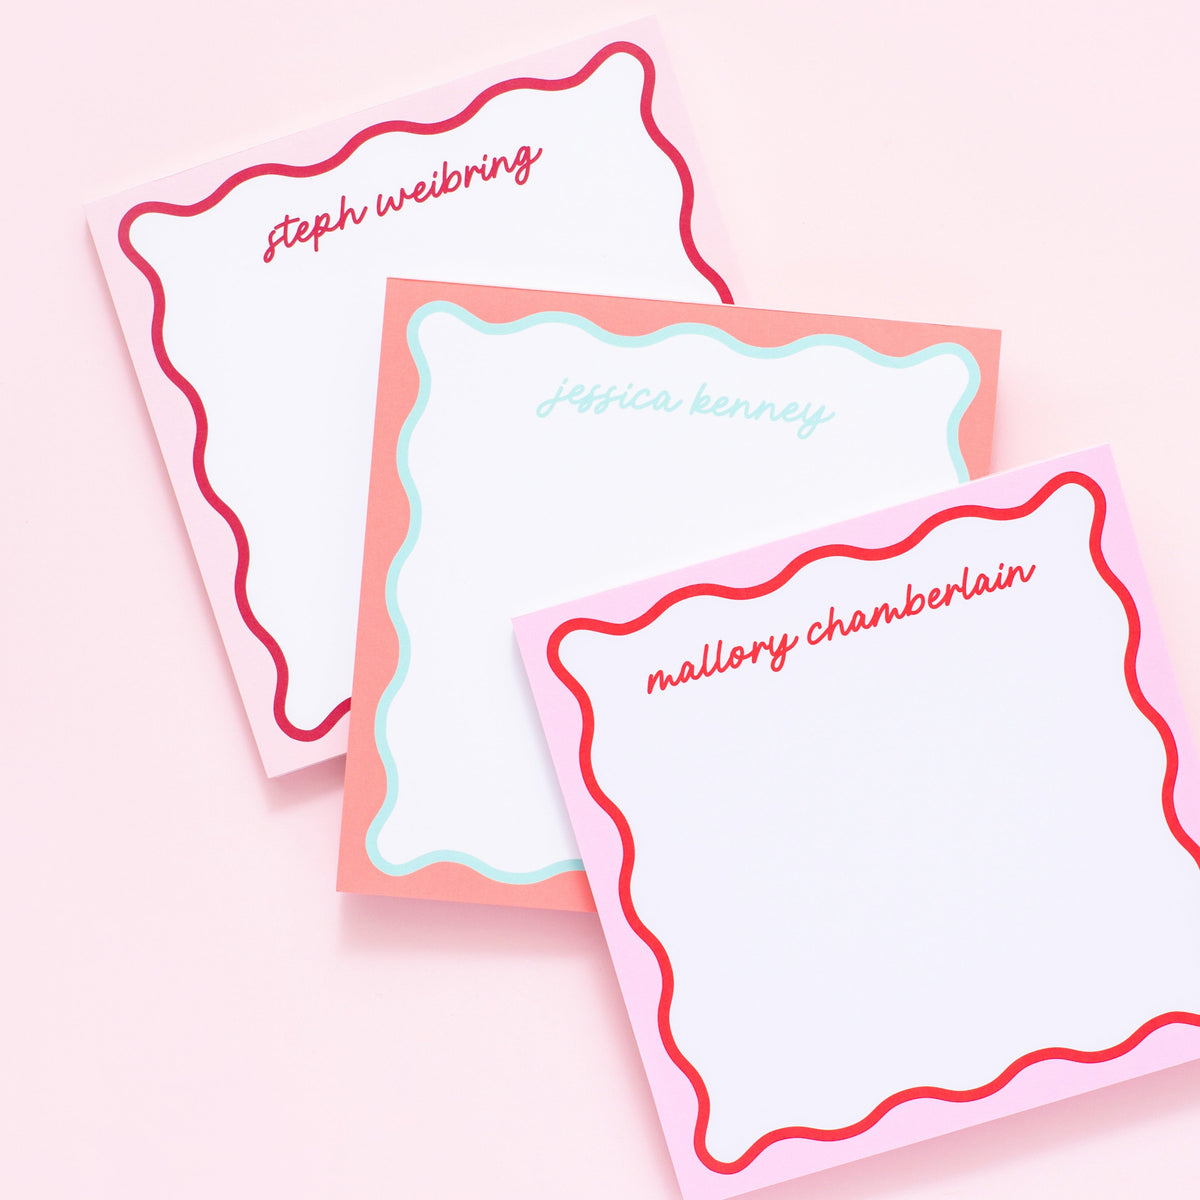 Wavy Collection Personalized Notepad